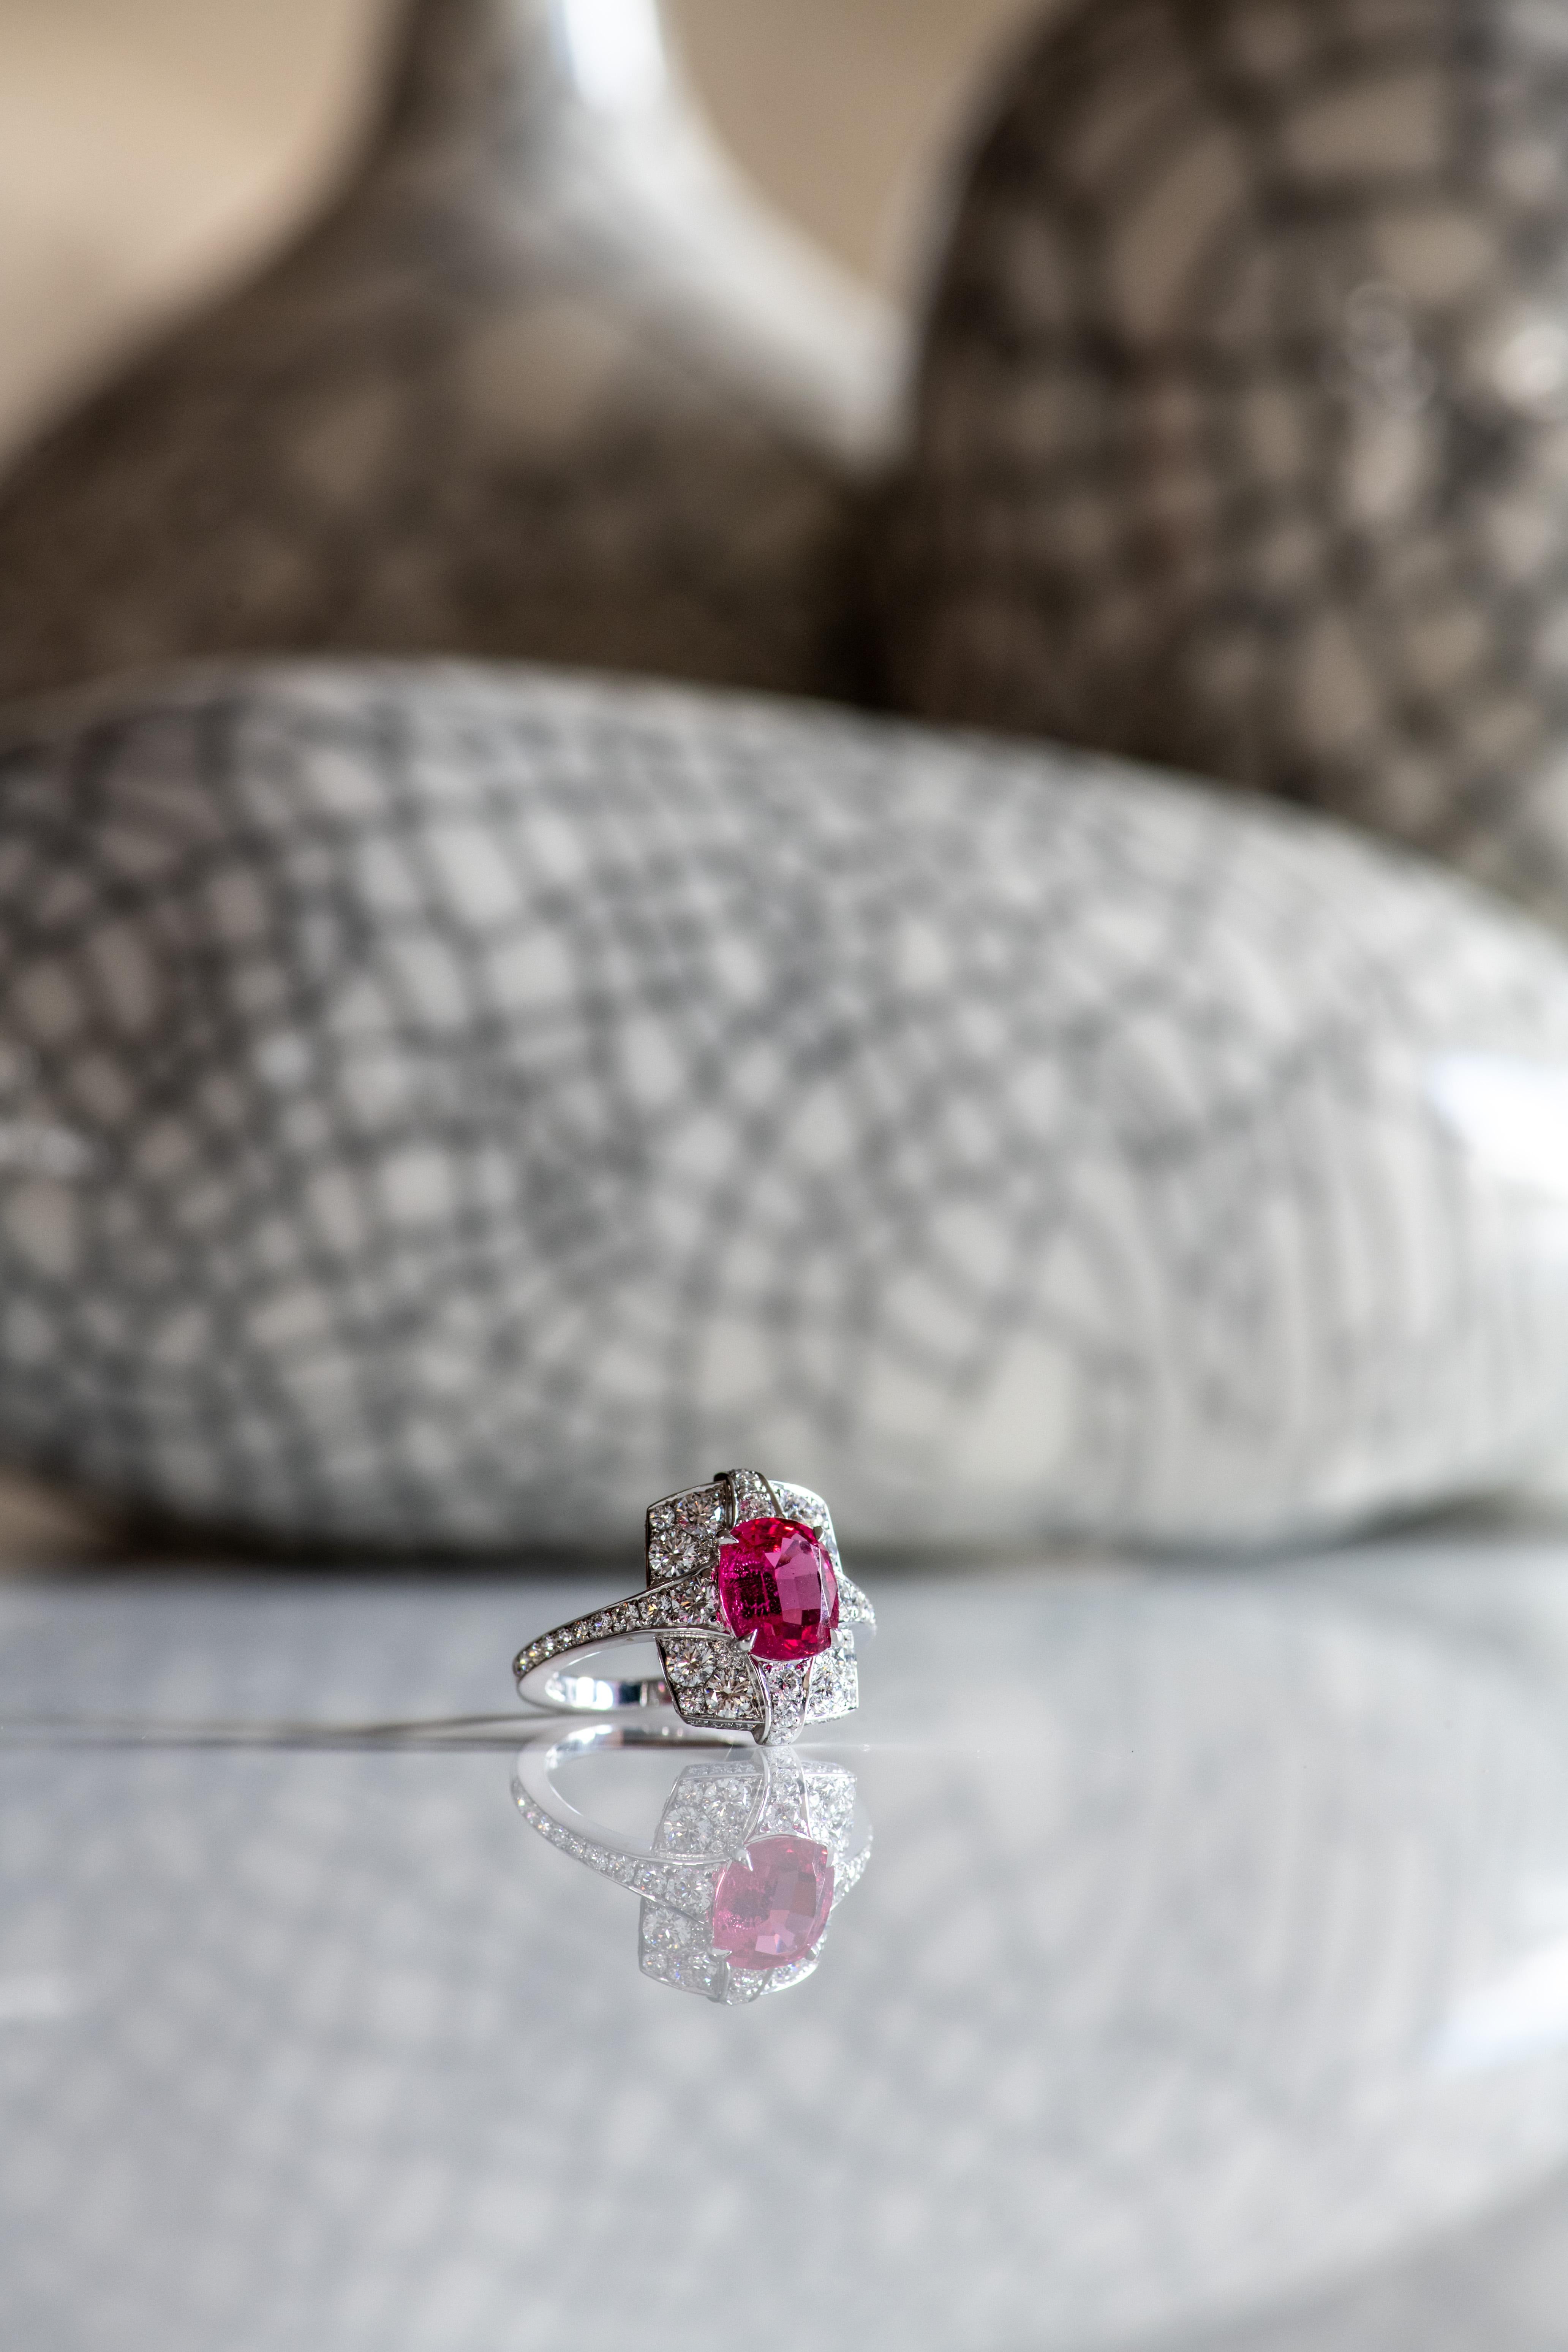 Contemporary 2.06 Carat Pink Spinel Cocktail Ring With Diamonds Set In White Gold